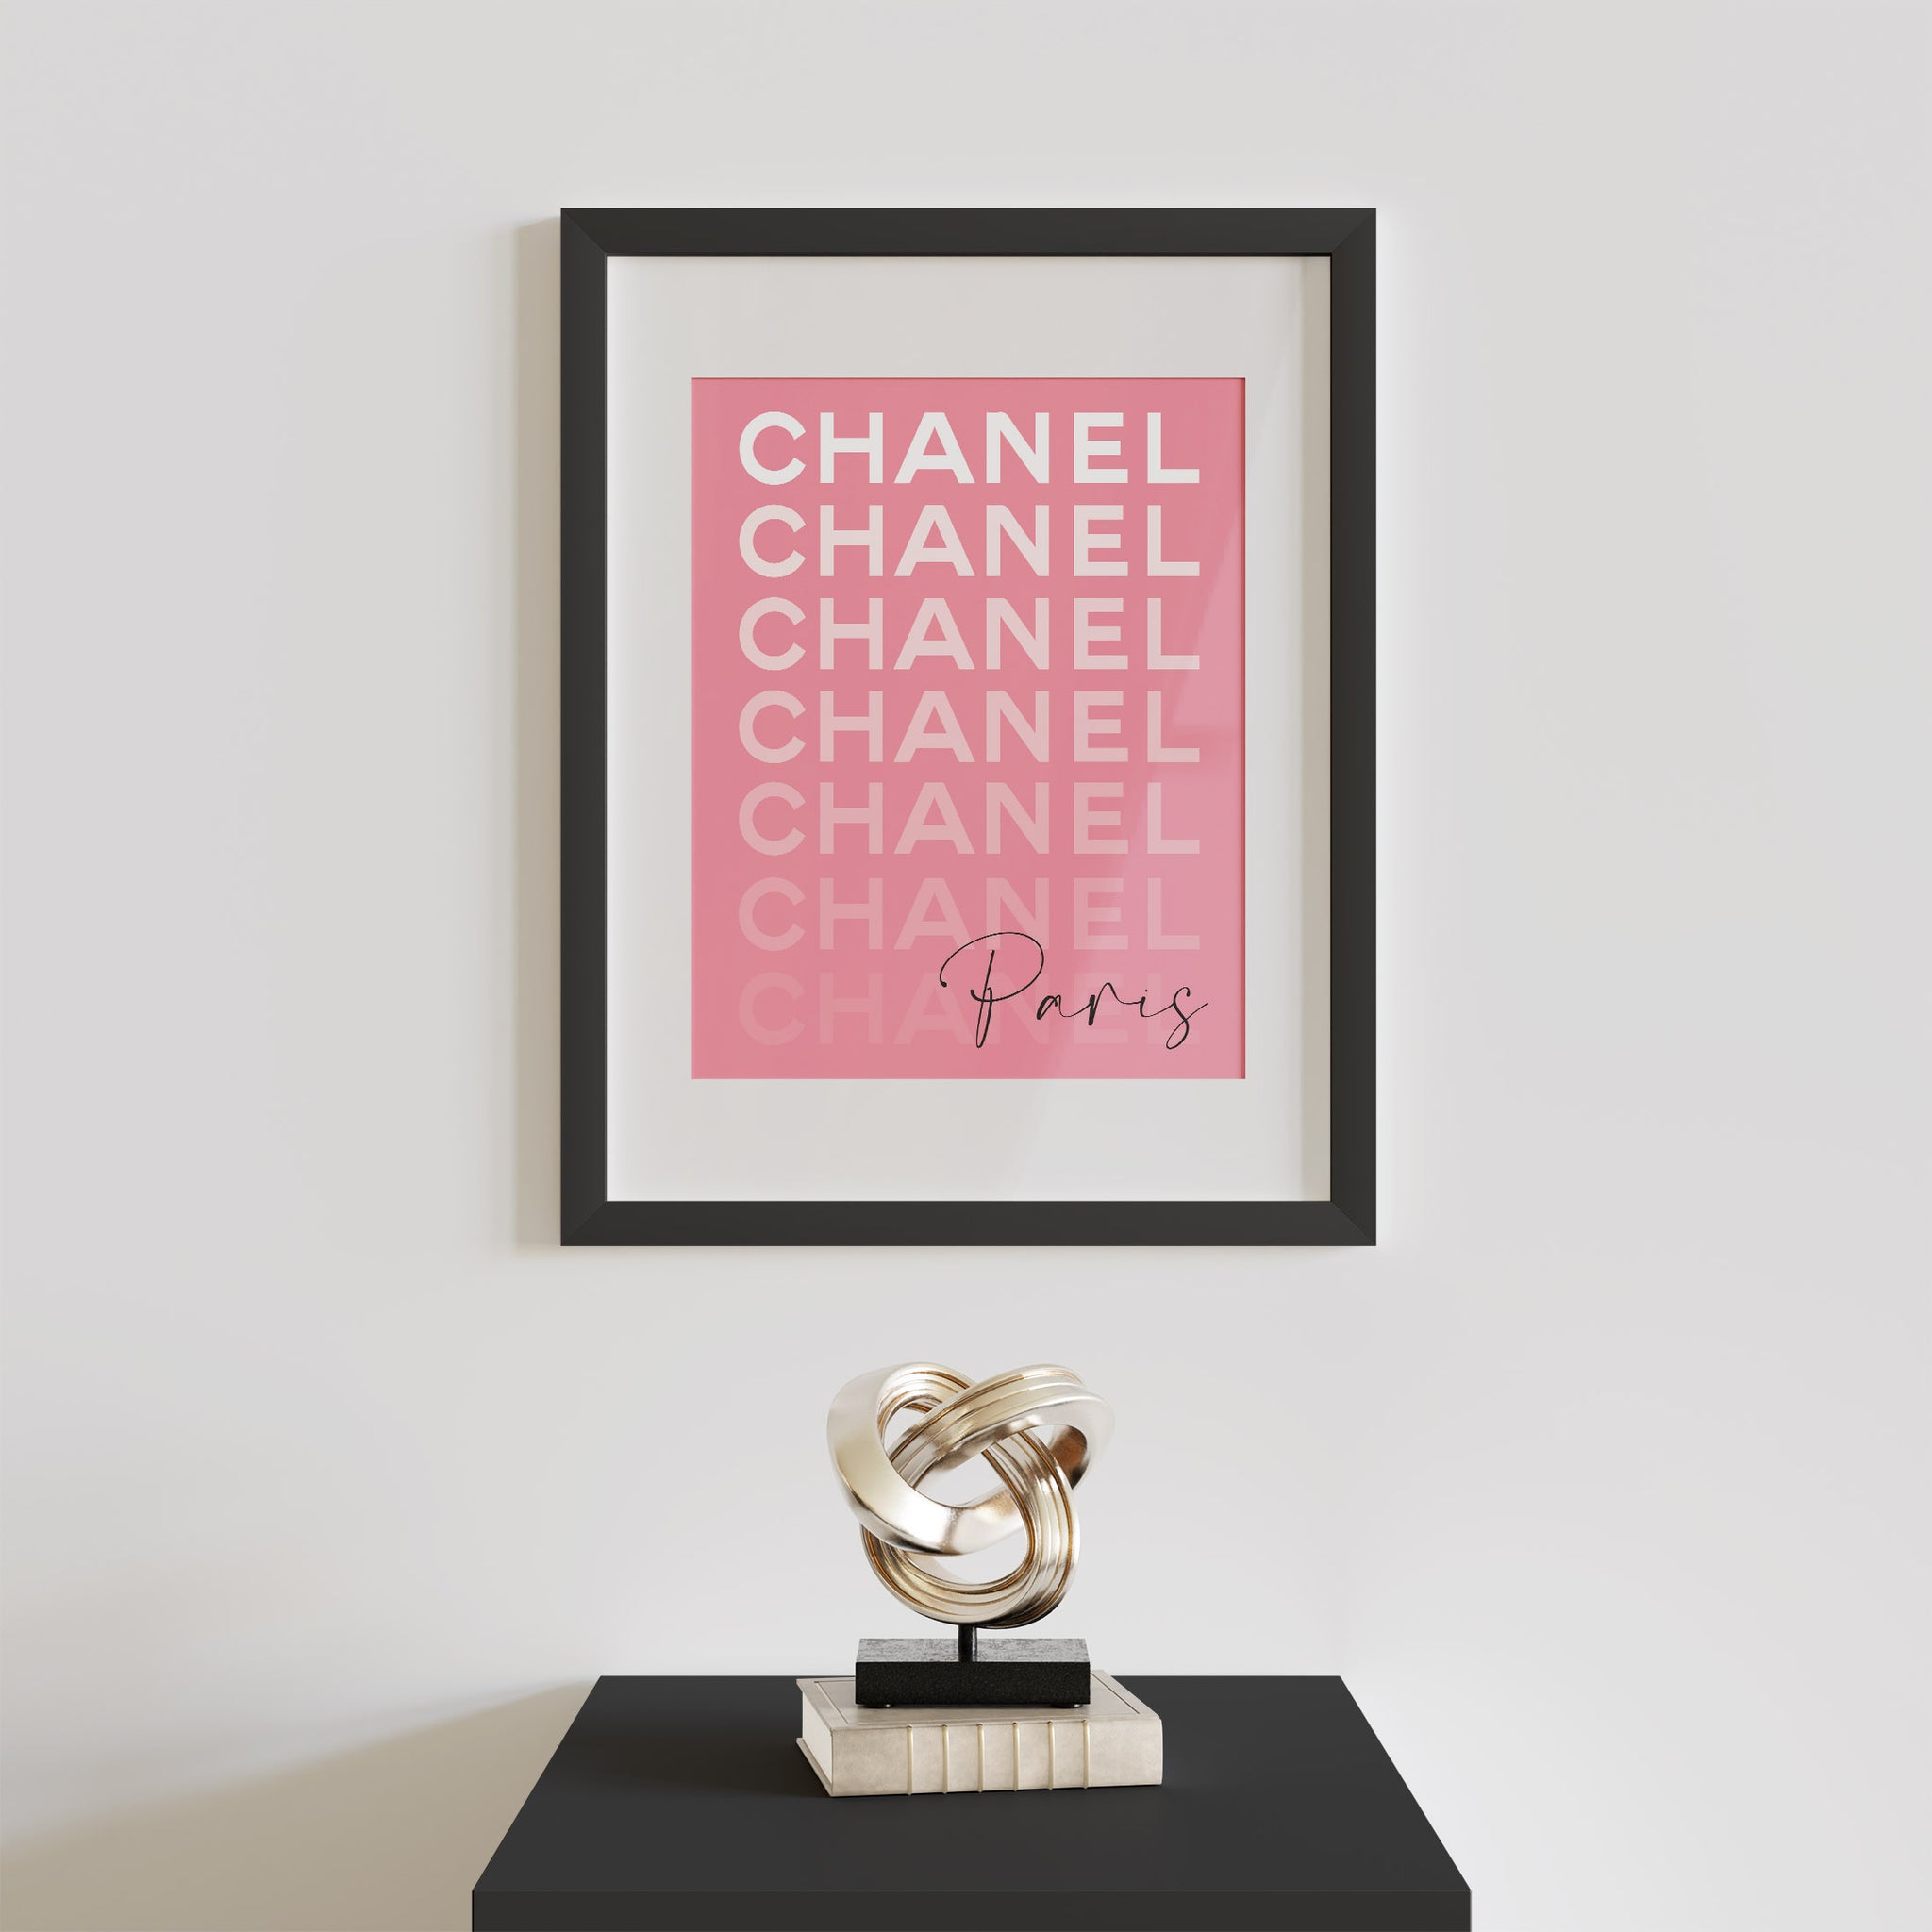 Amazoncom Buyartforless Chanel Hot Pink and Black Urban Chic by Pop Queen  Graphic 36x36 Wrapped Canvas Wall Art Décor Multicolored Posters  Prints